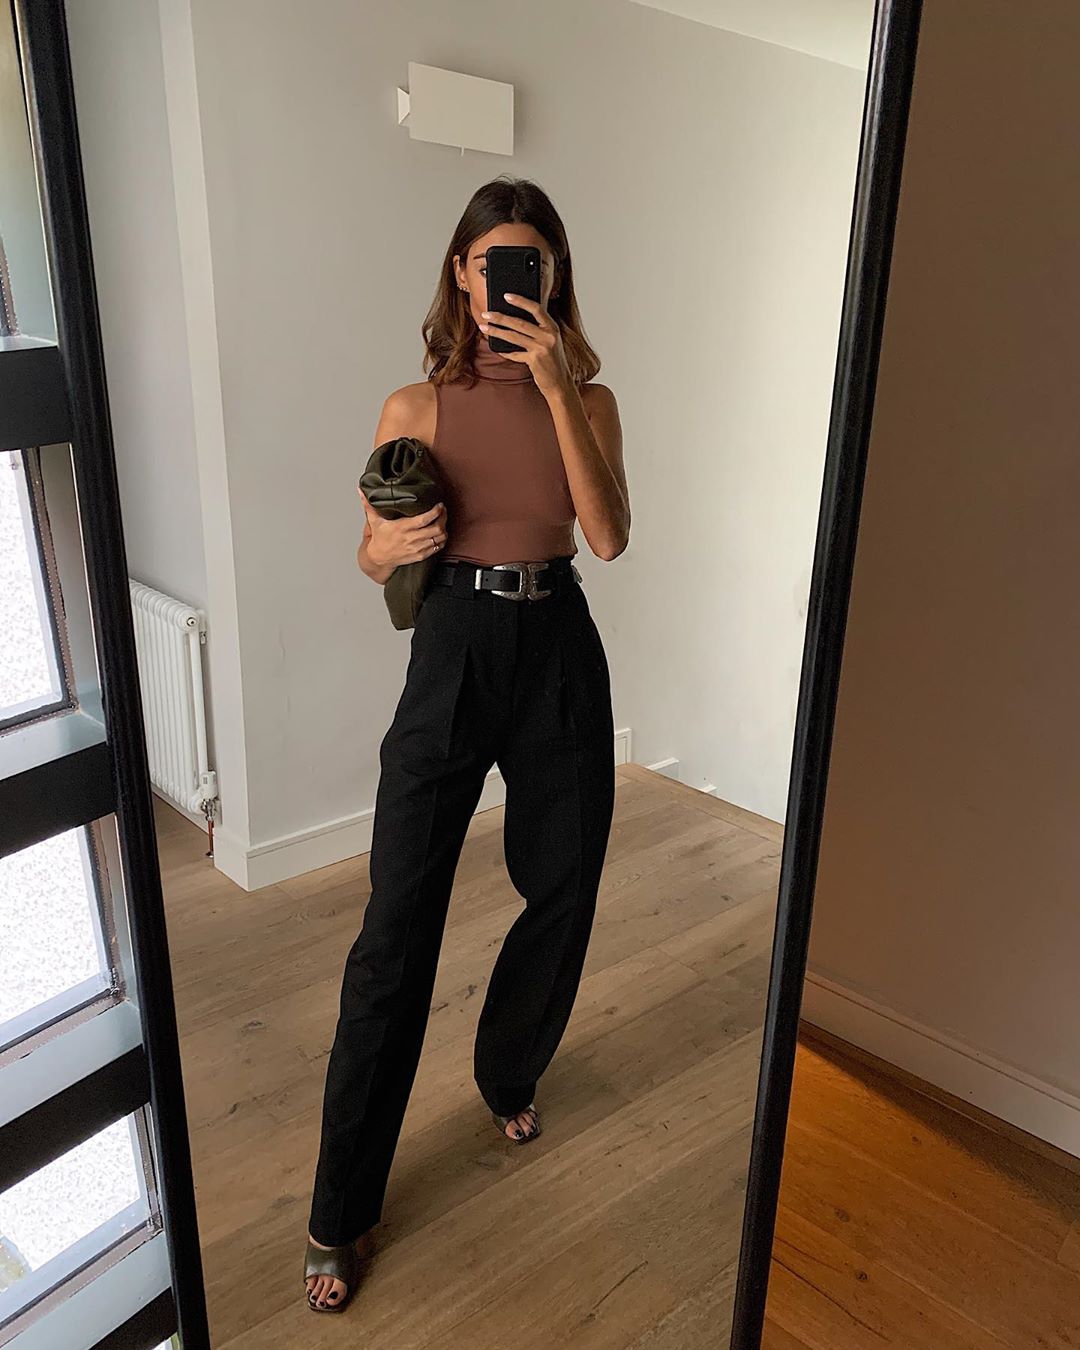 Le Fashion: A Chic Way to Wear High-Waisted Black Pants for Spring